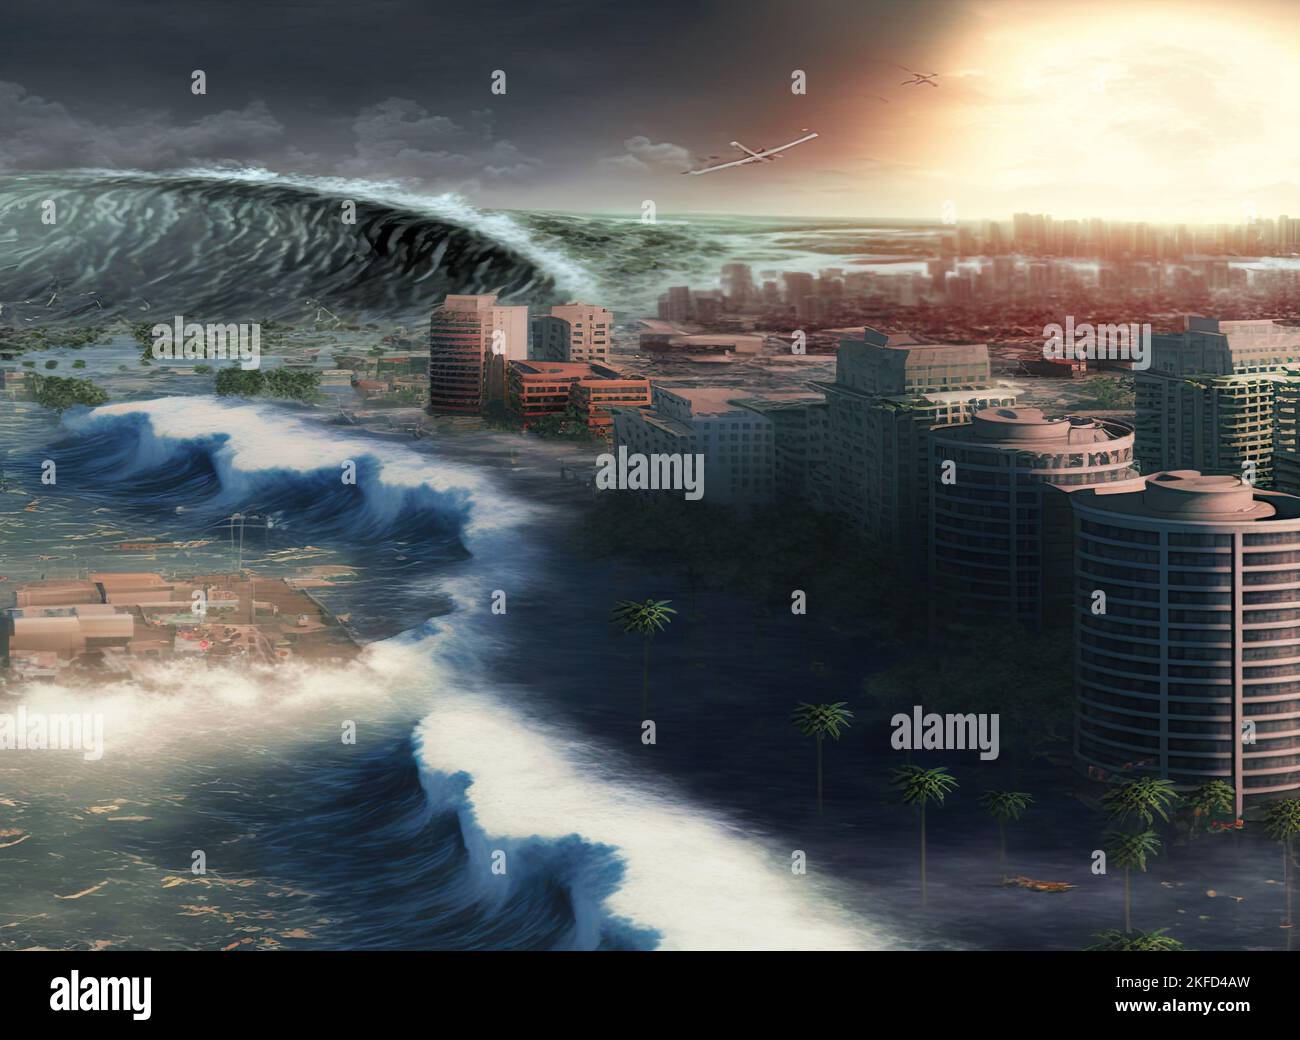 A huge tsunami with 100-foot waves hitting a tropical beach city. Natural disaster caused by climate change. Stock Photo